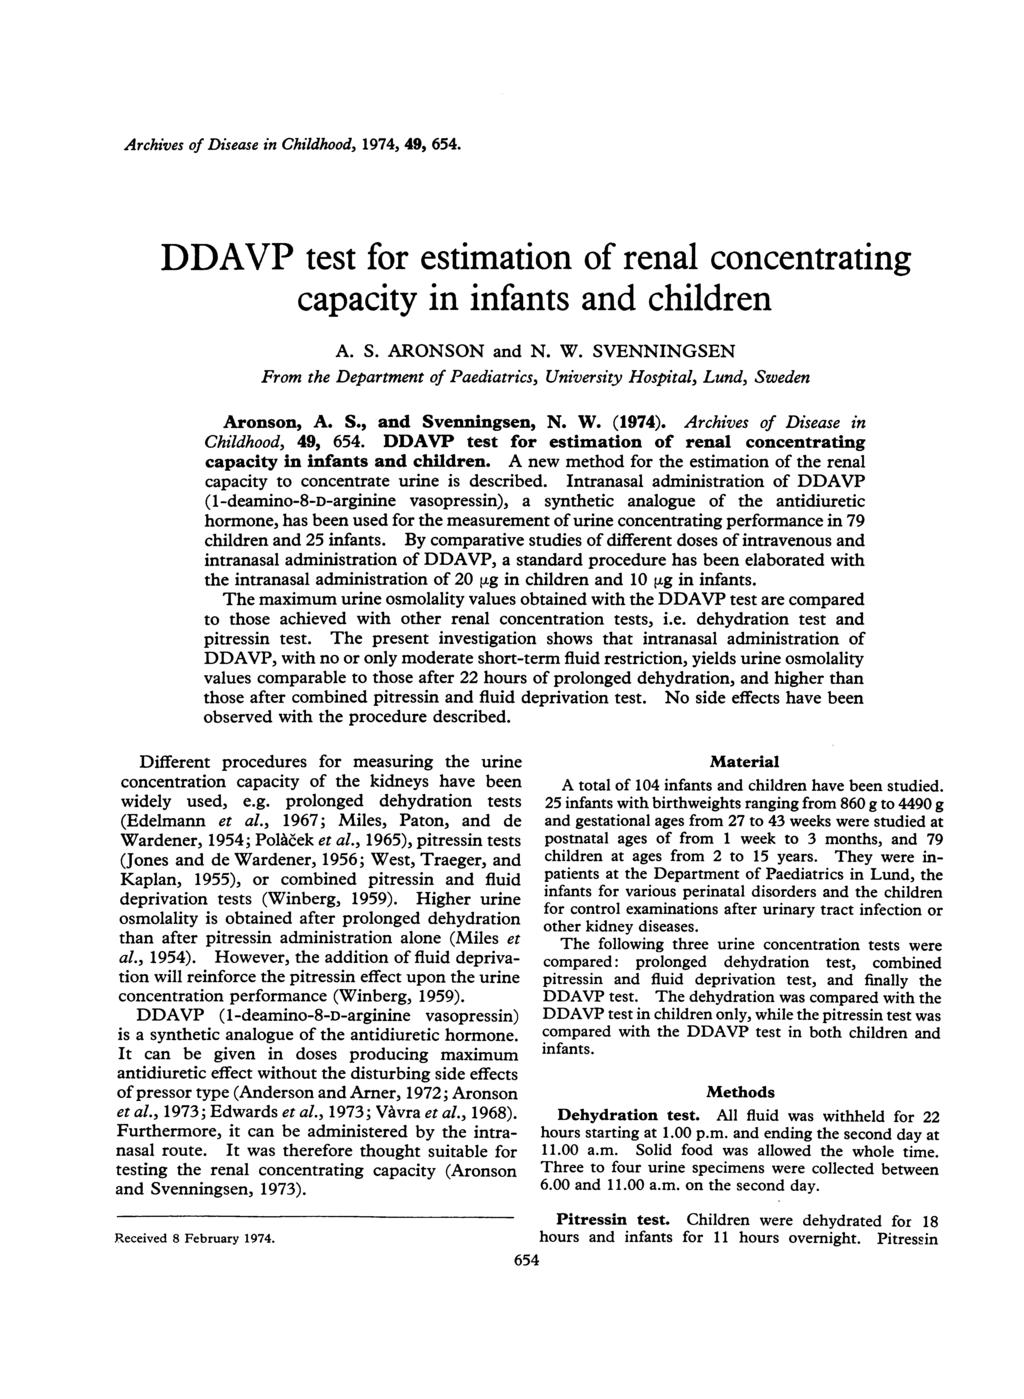 Archives of Disese in Childhood, 1974, 49, 654. DDAVP test for estimtion of renl concentrting cpcity in infnts nd children A. S. ARONSON nd N. W.